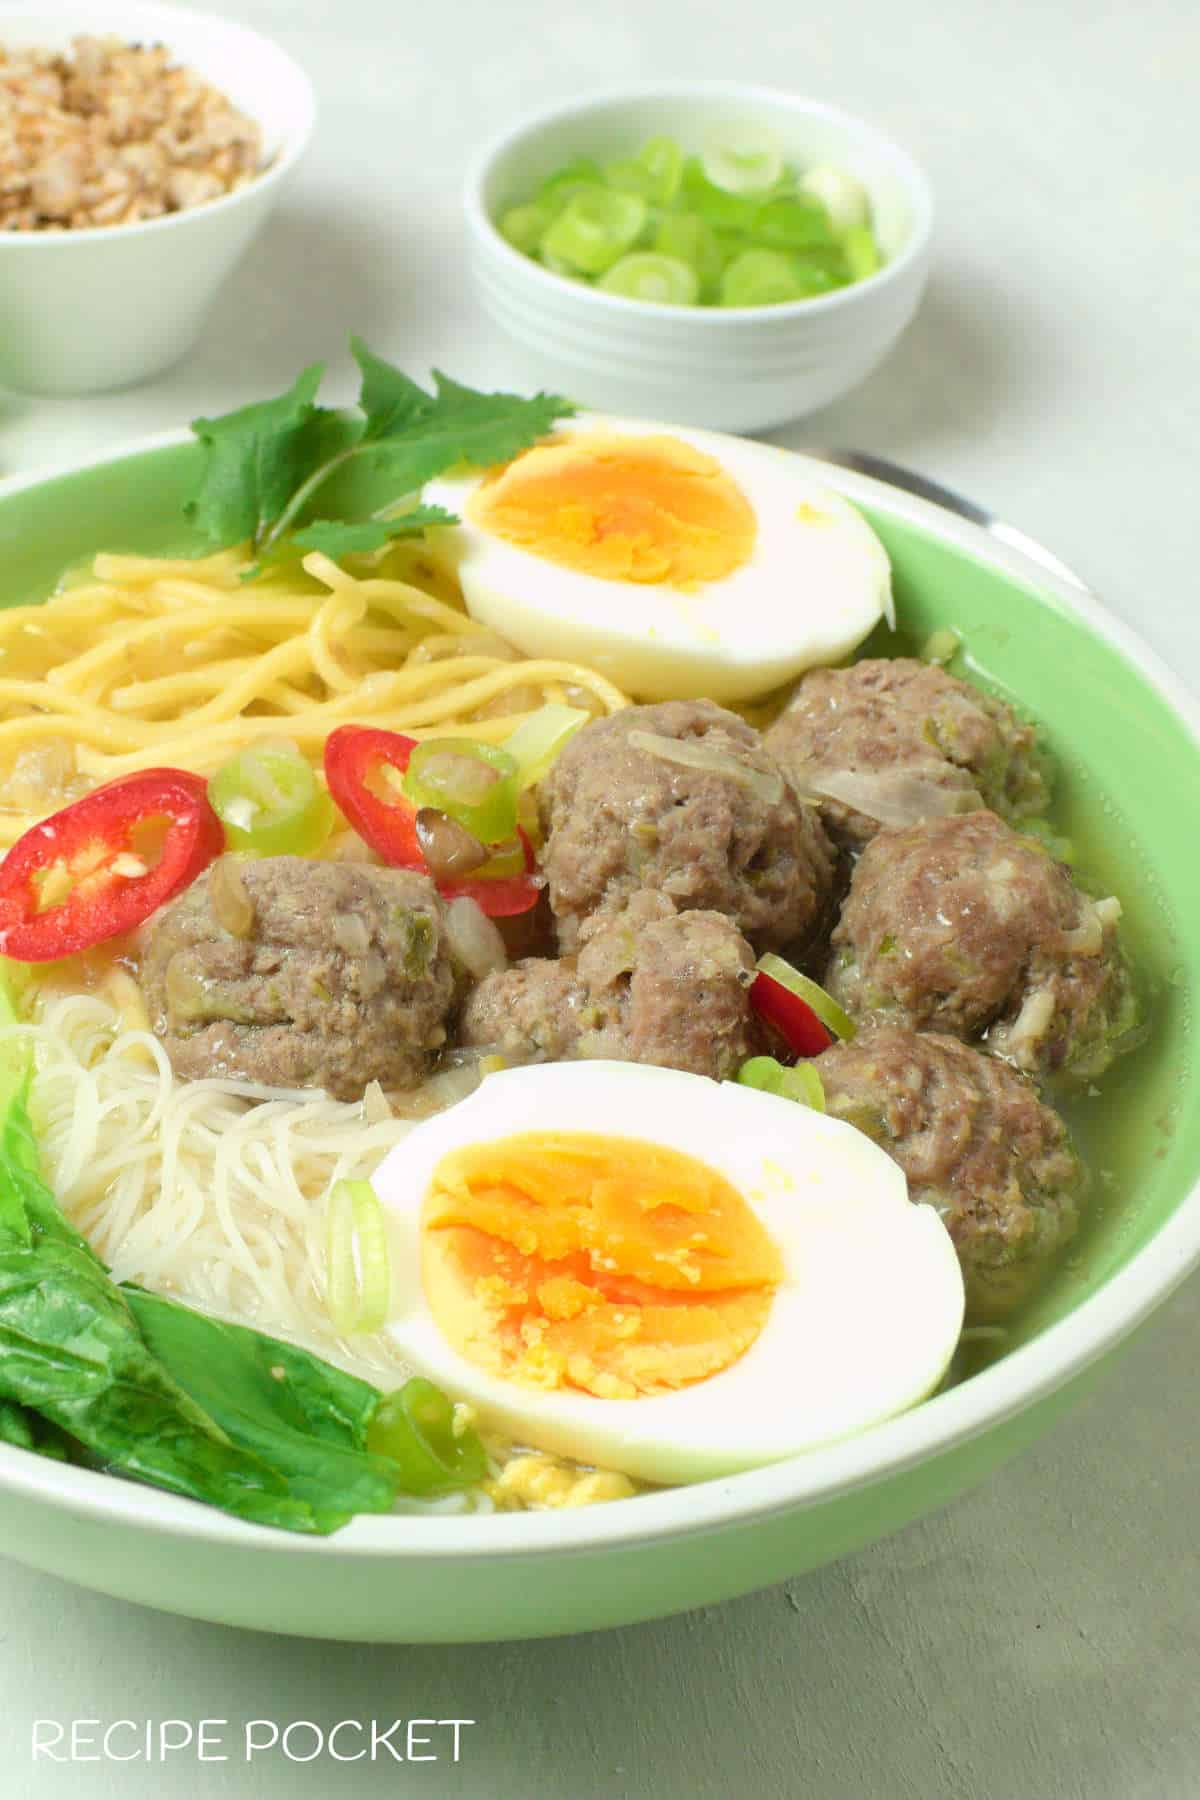 Bakso garnished with hard boiled eggs and chili.